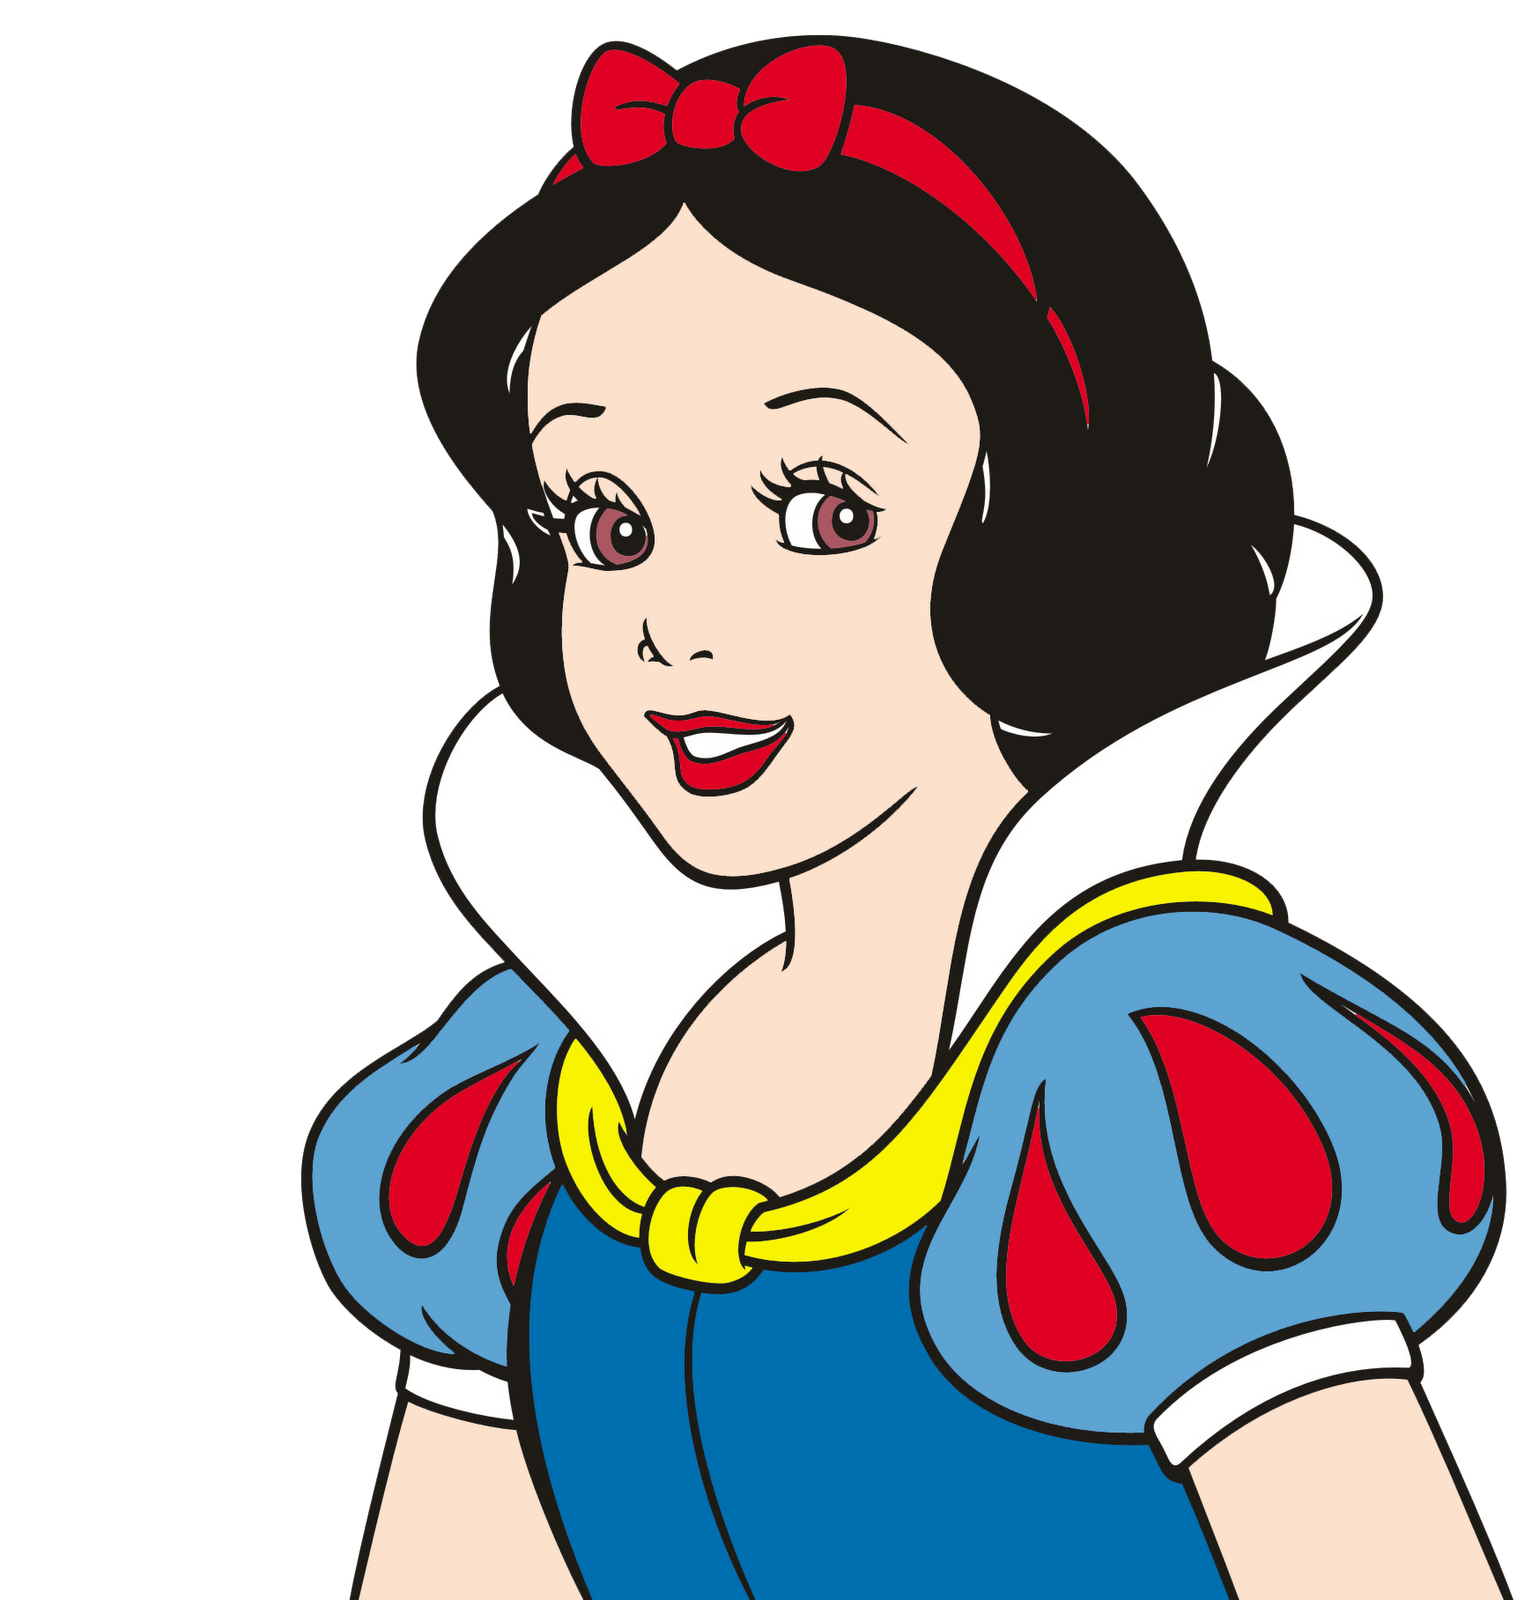 Snow white and the. Worry clipart spasmodic